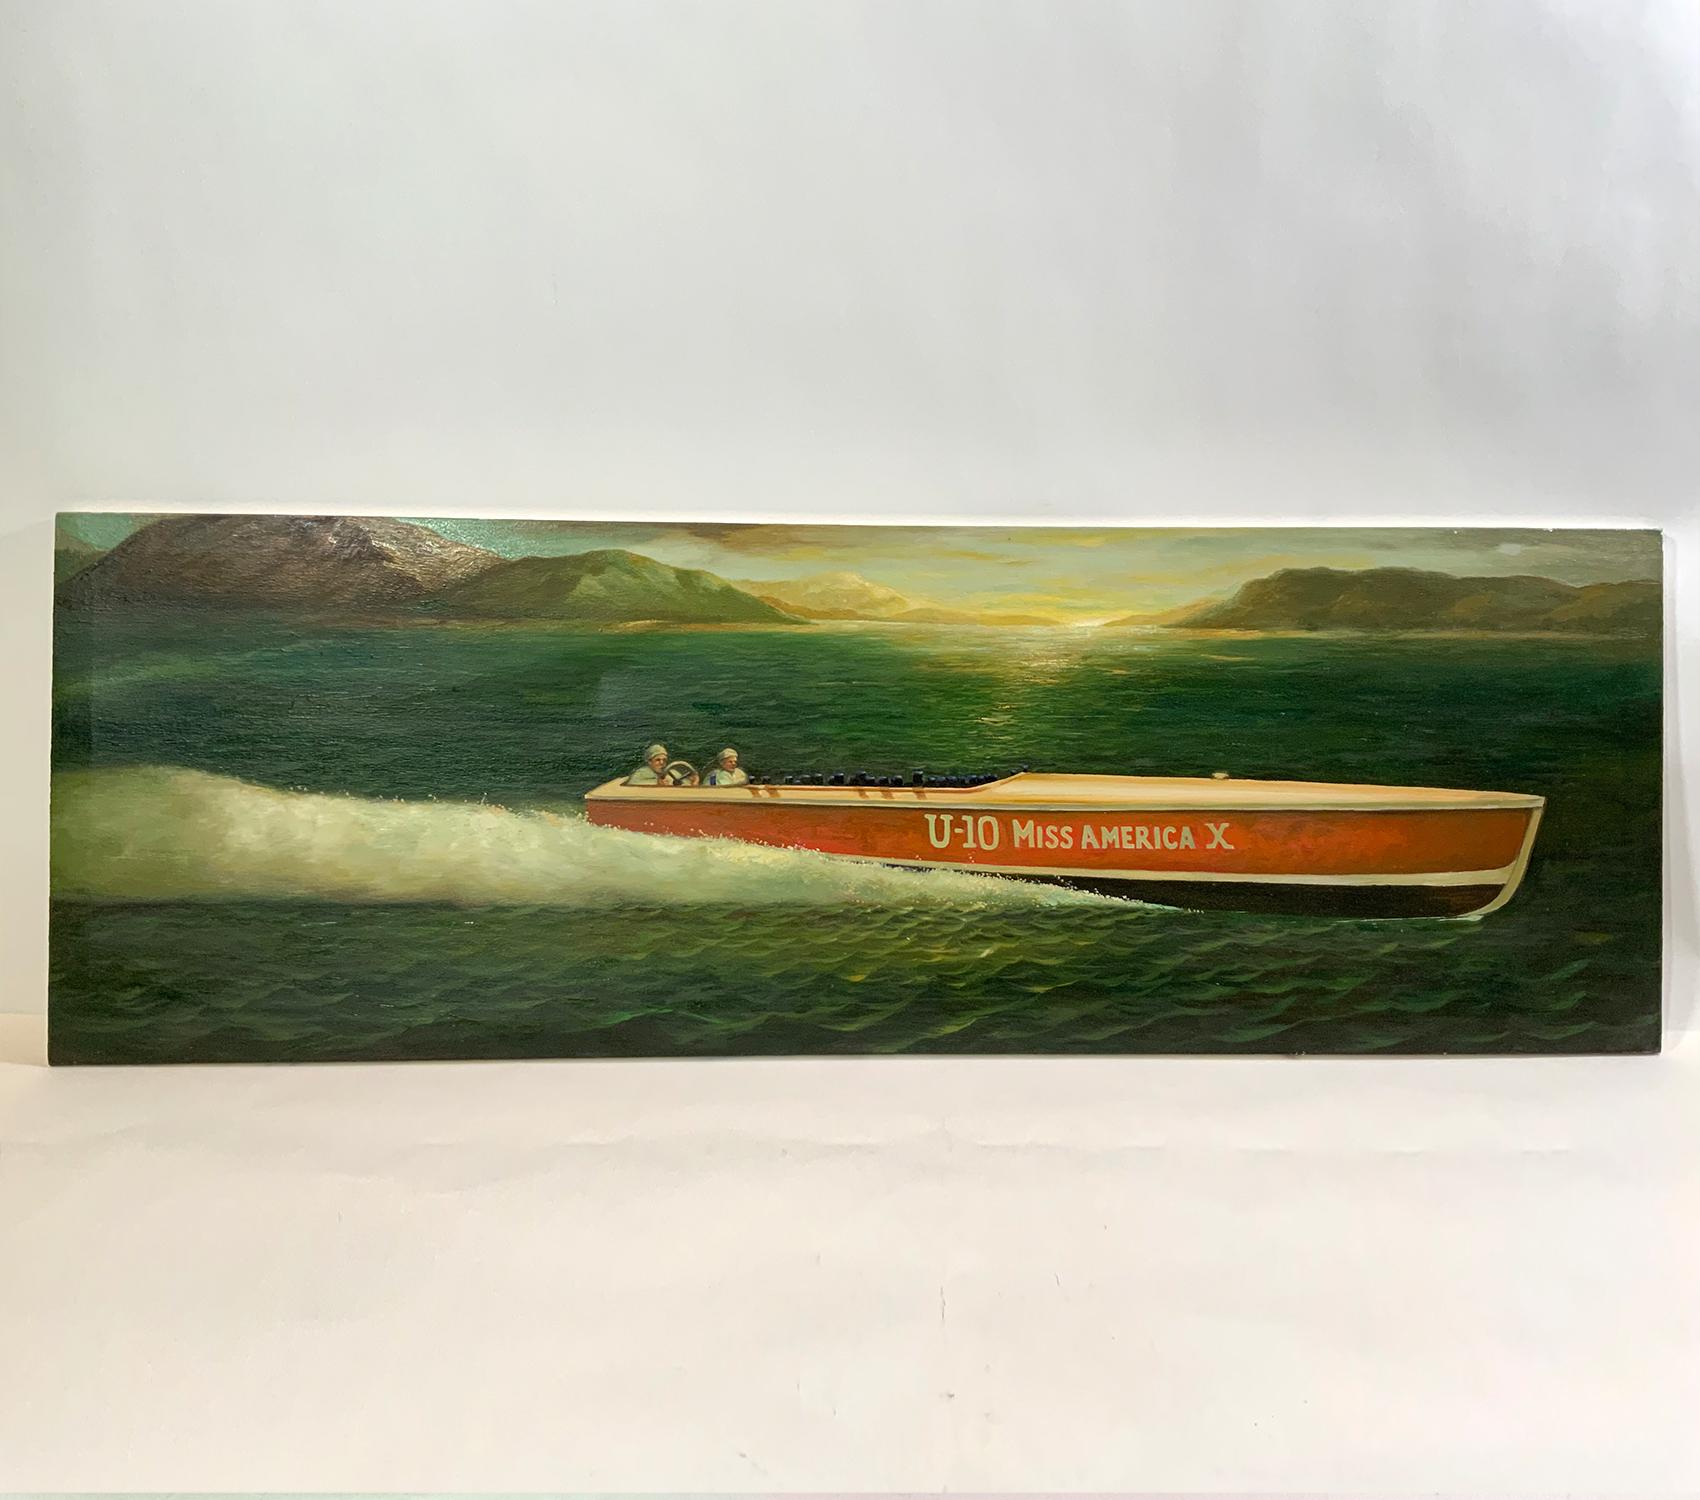 Oil on canvas of the Gold Cup Speedboat Miss America x U-10. Vessel is shown racing at a high speed. Gallery wrap mount over wood frame.

Weight: 8 LBS
Overall Dimensions: 20” H x 60